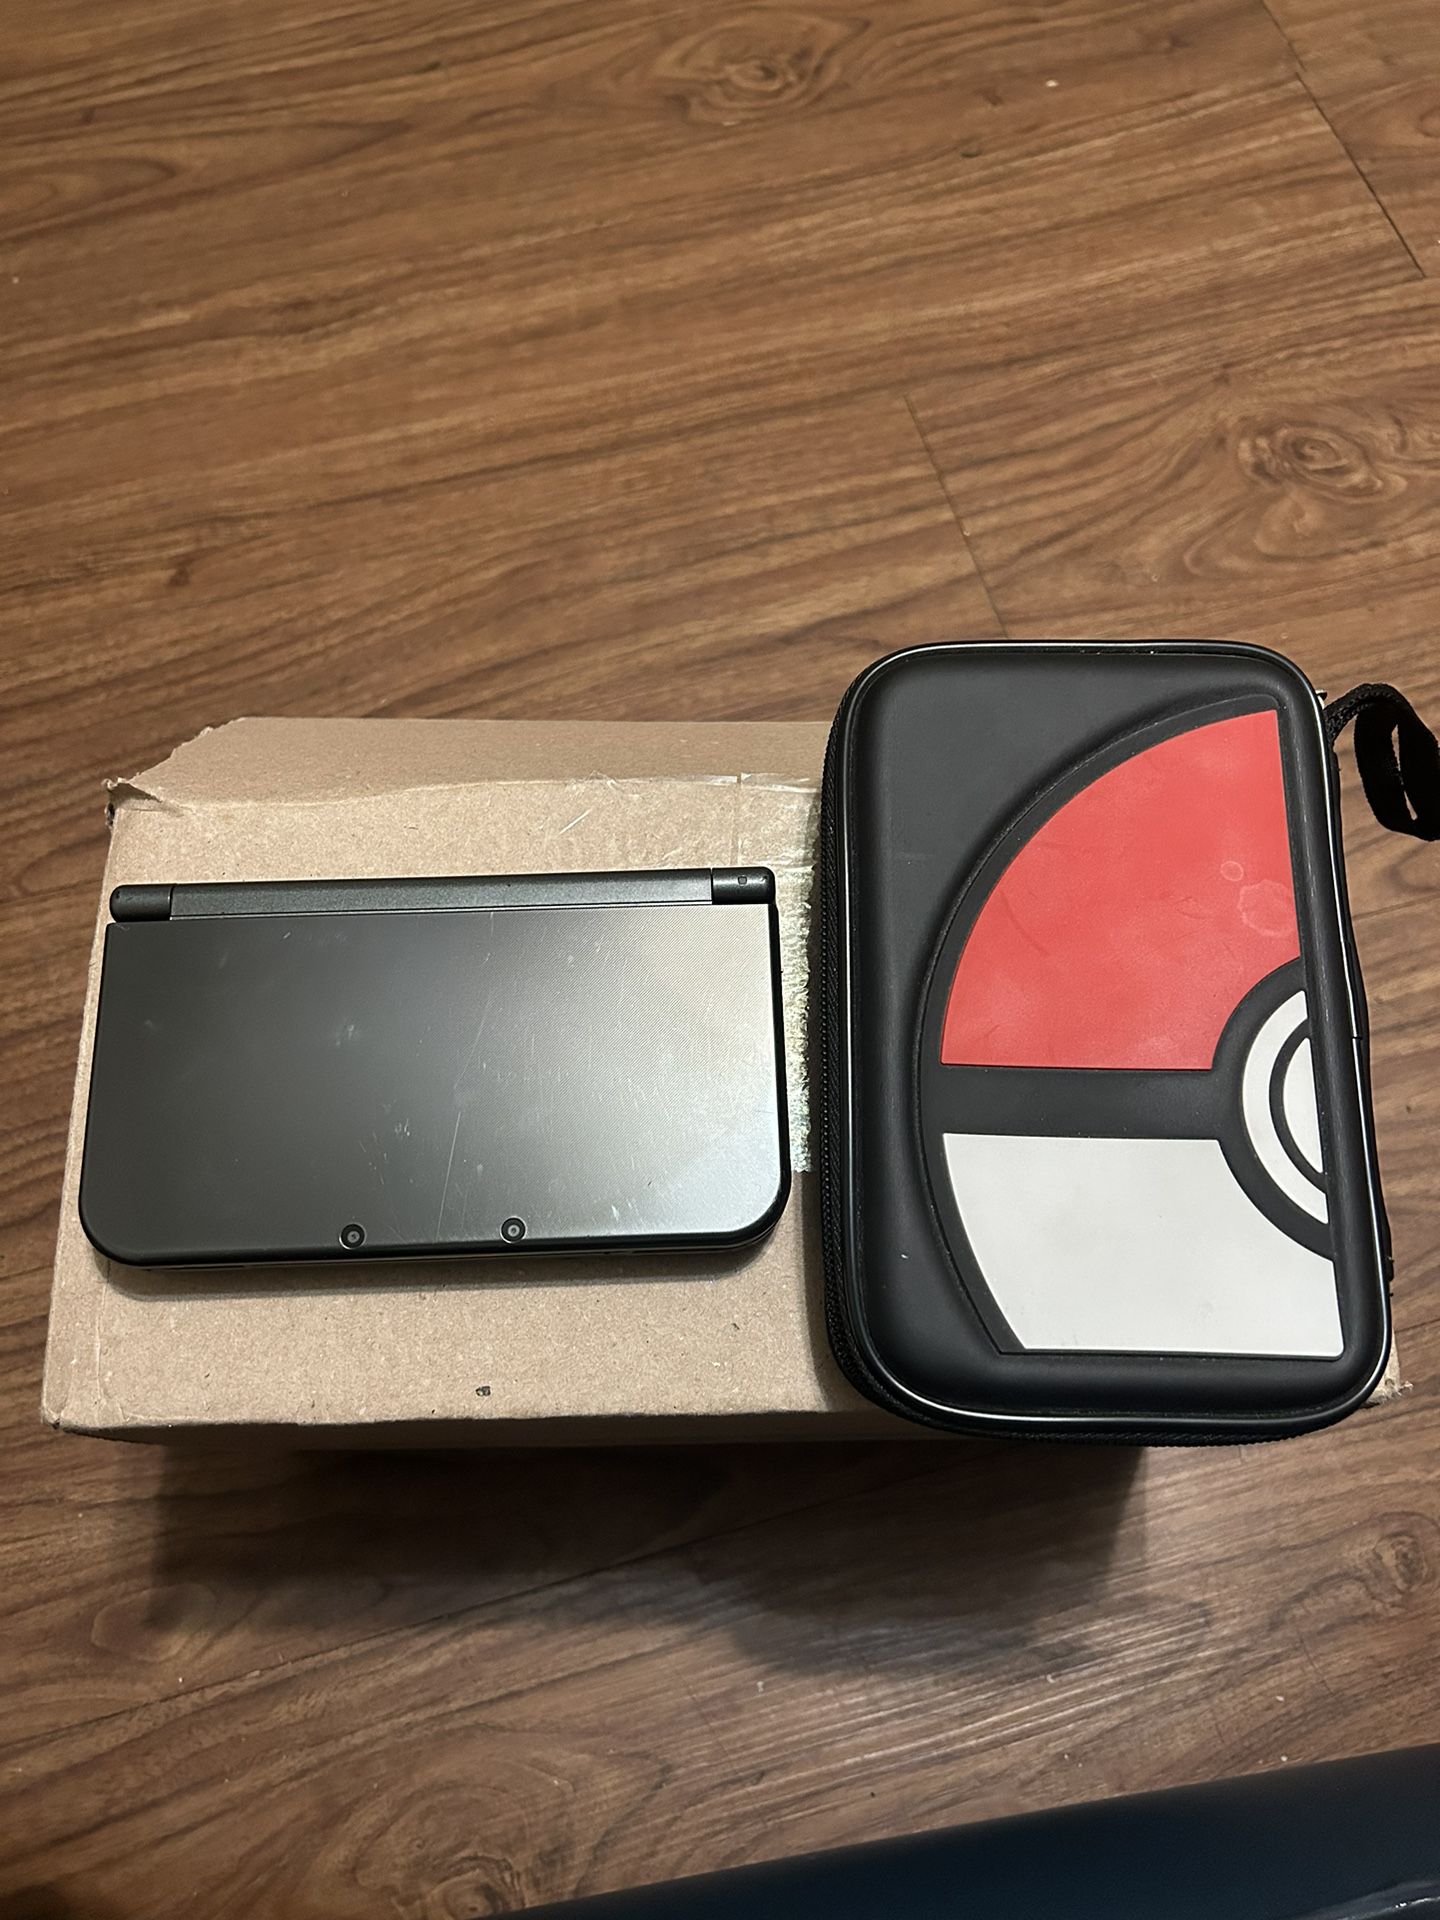 Used  “new” Nintendo 3Ds XL